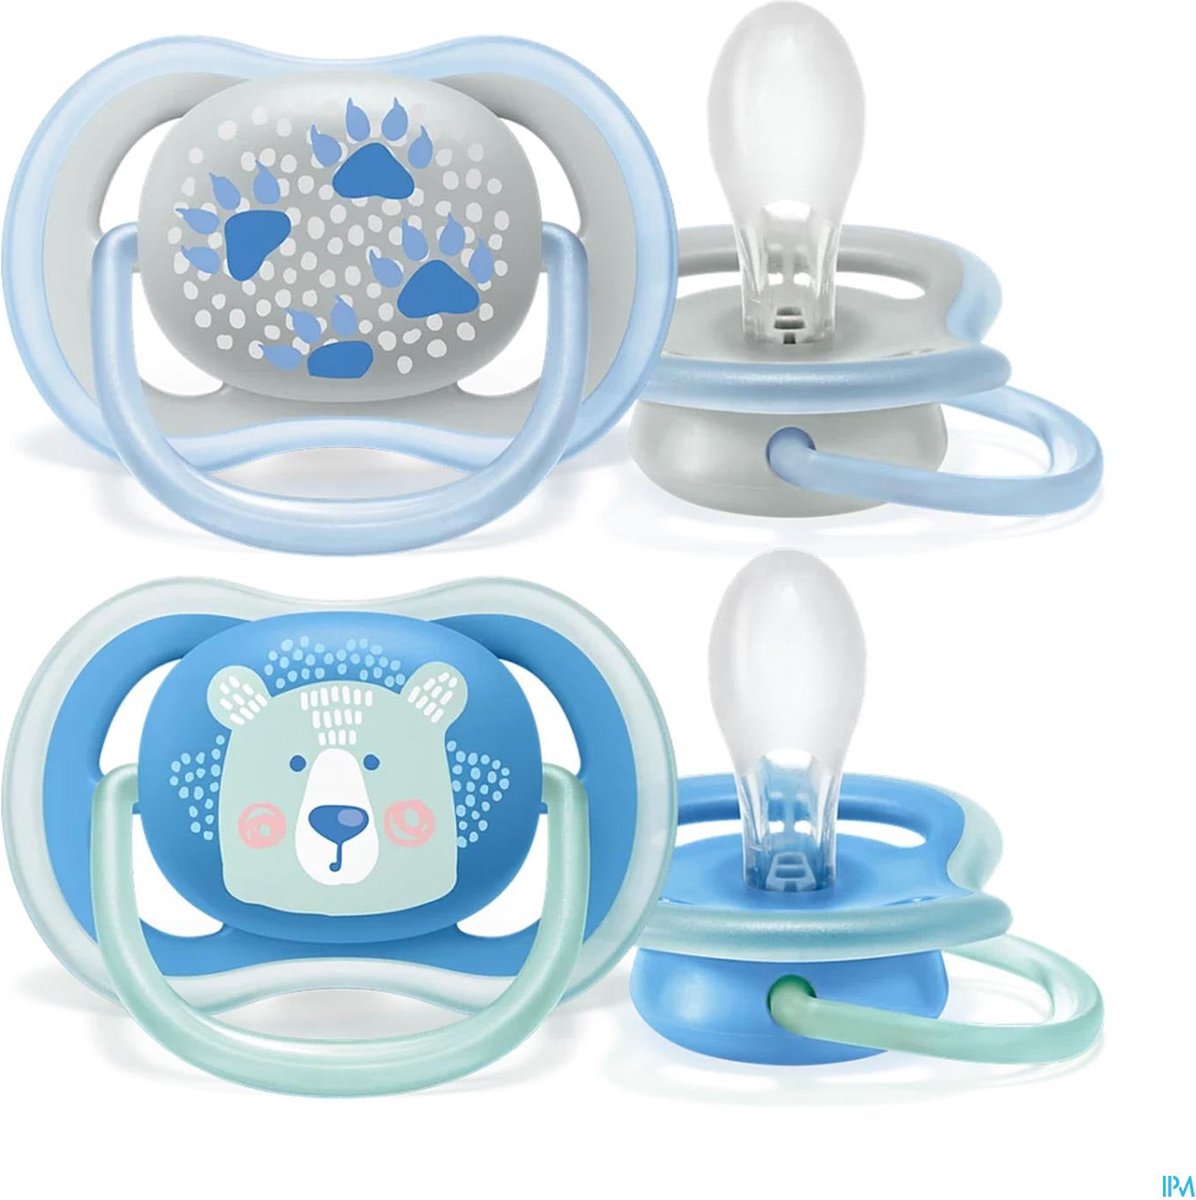 Philips Avent Sucettes nuit ultra air SCF376/14 6-18 mois silicone